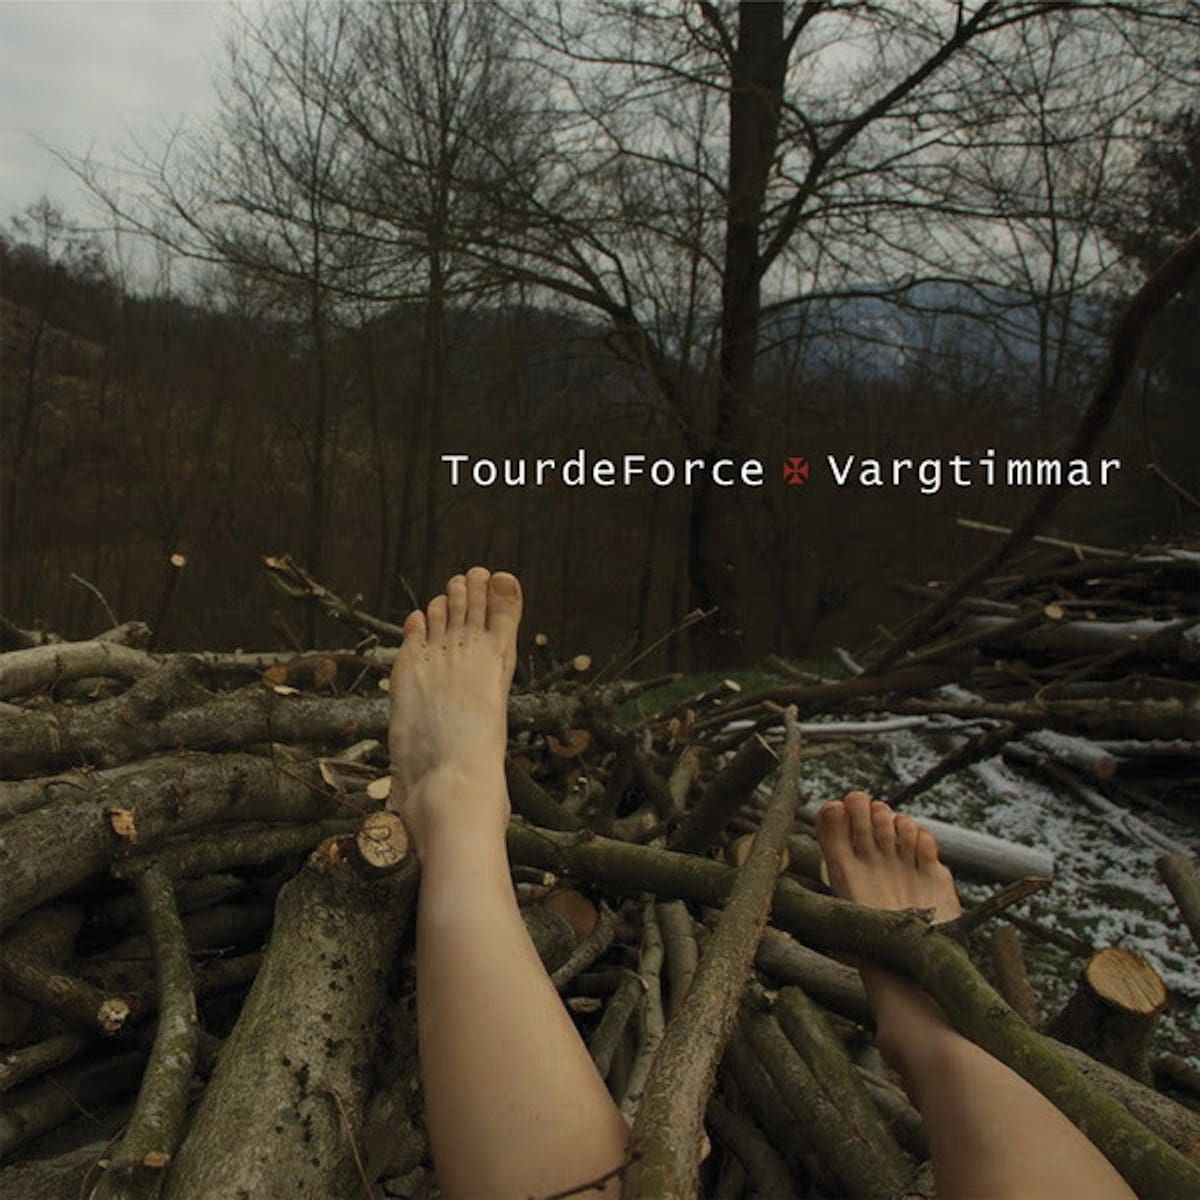 TourdeForce returns with brand new album 'Vargtimmar' - new video out now